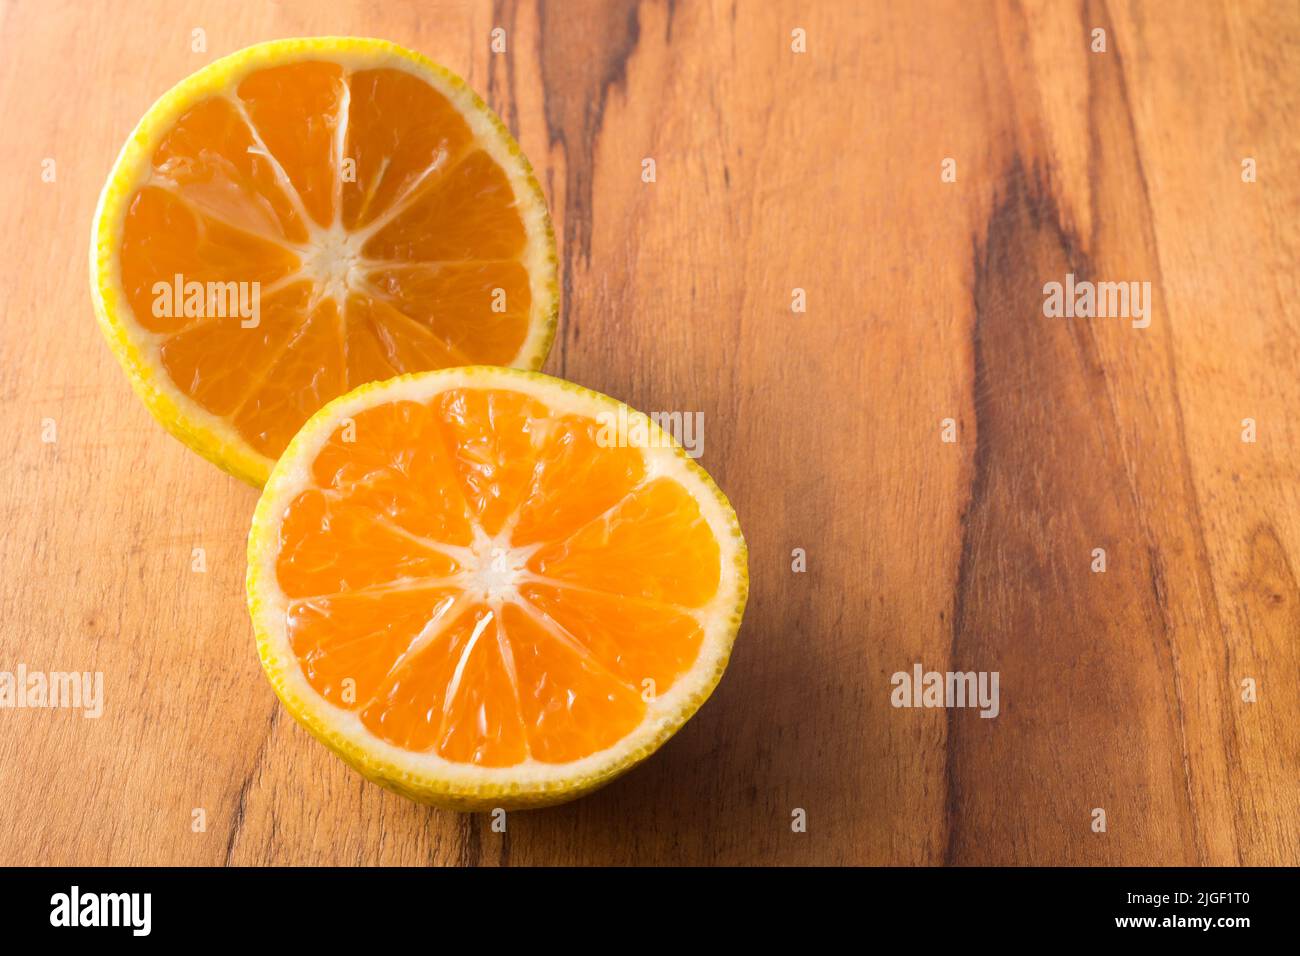 sweet orange fruit slices, isolated on a wooden surface, taken in shallow depth of field with copy space Stock Photo